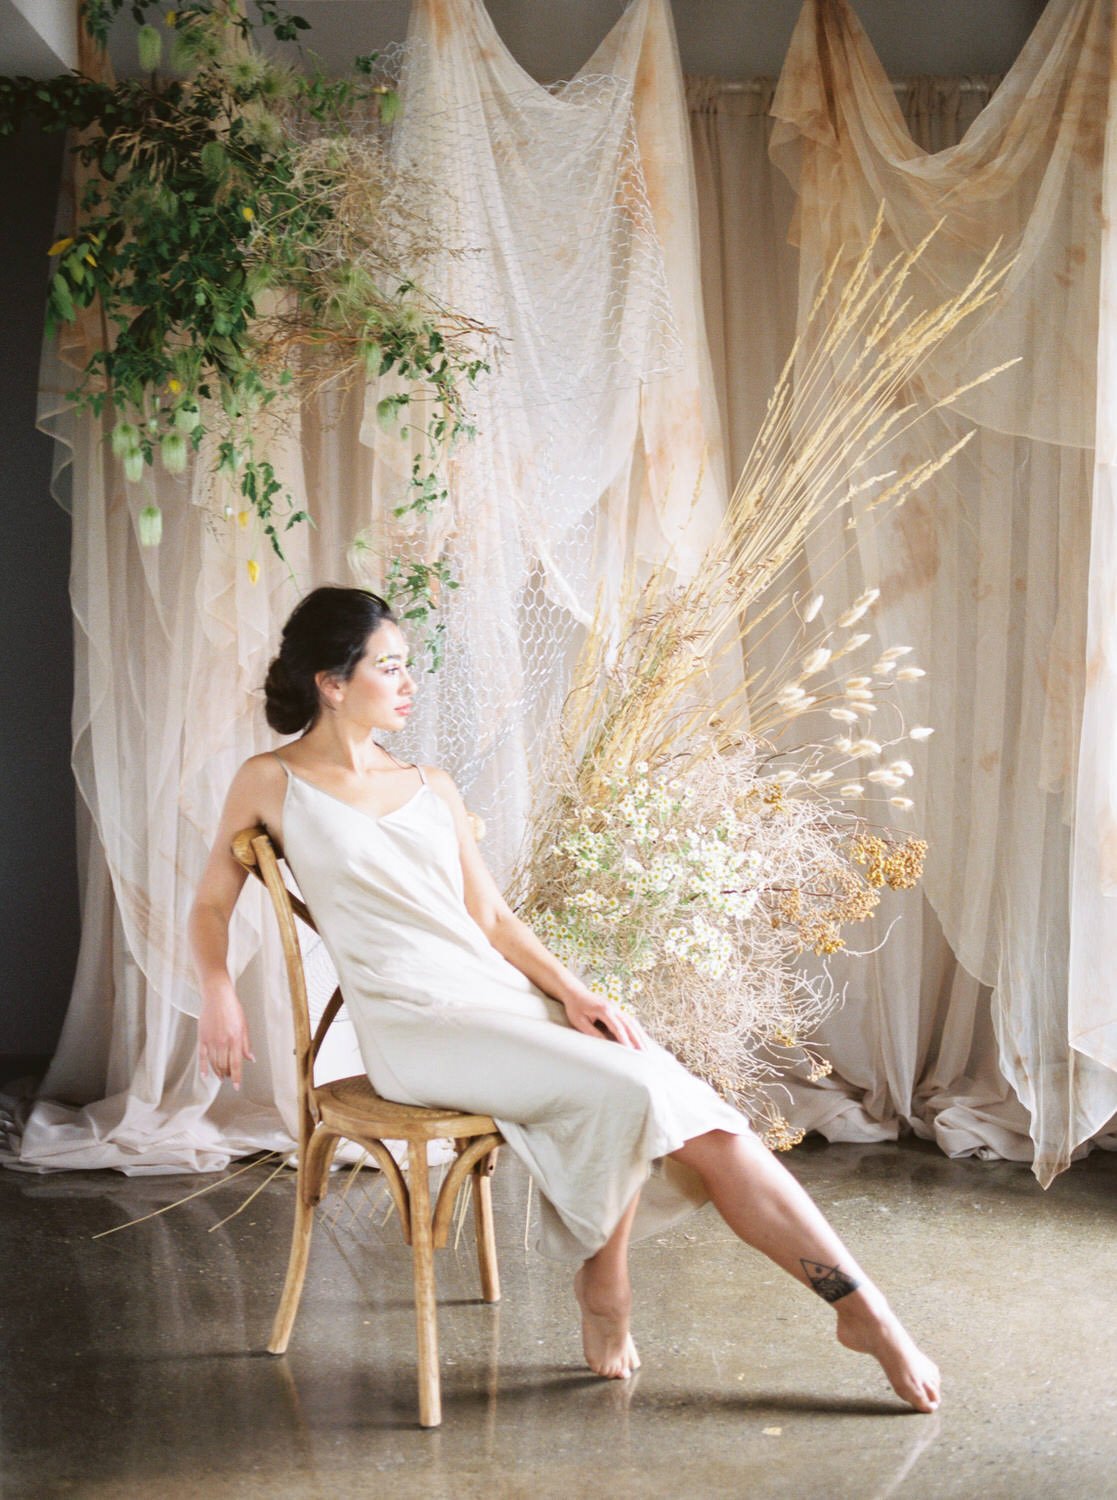  Peach Sorbet Tulle ・  Maricle Kang Photography  ・  Jacqueline Rae  ・  Fall for Florals  